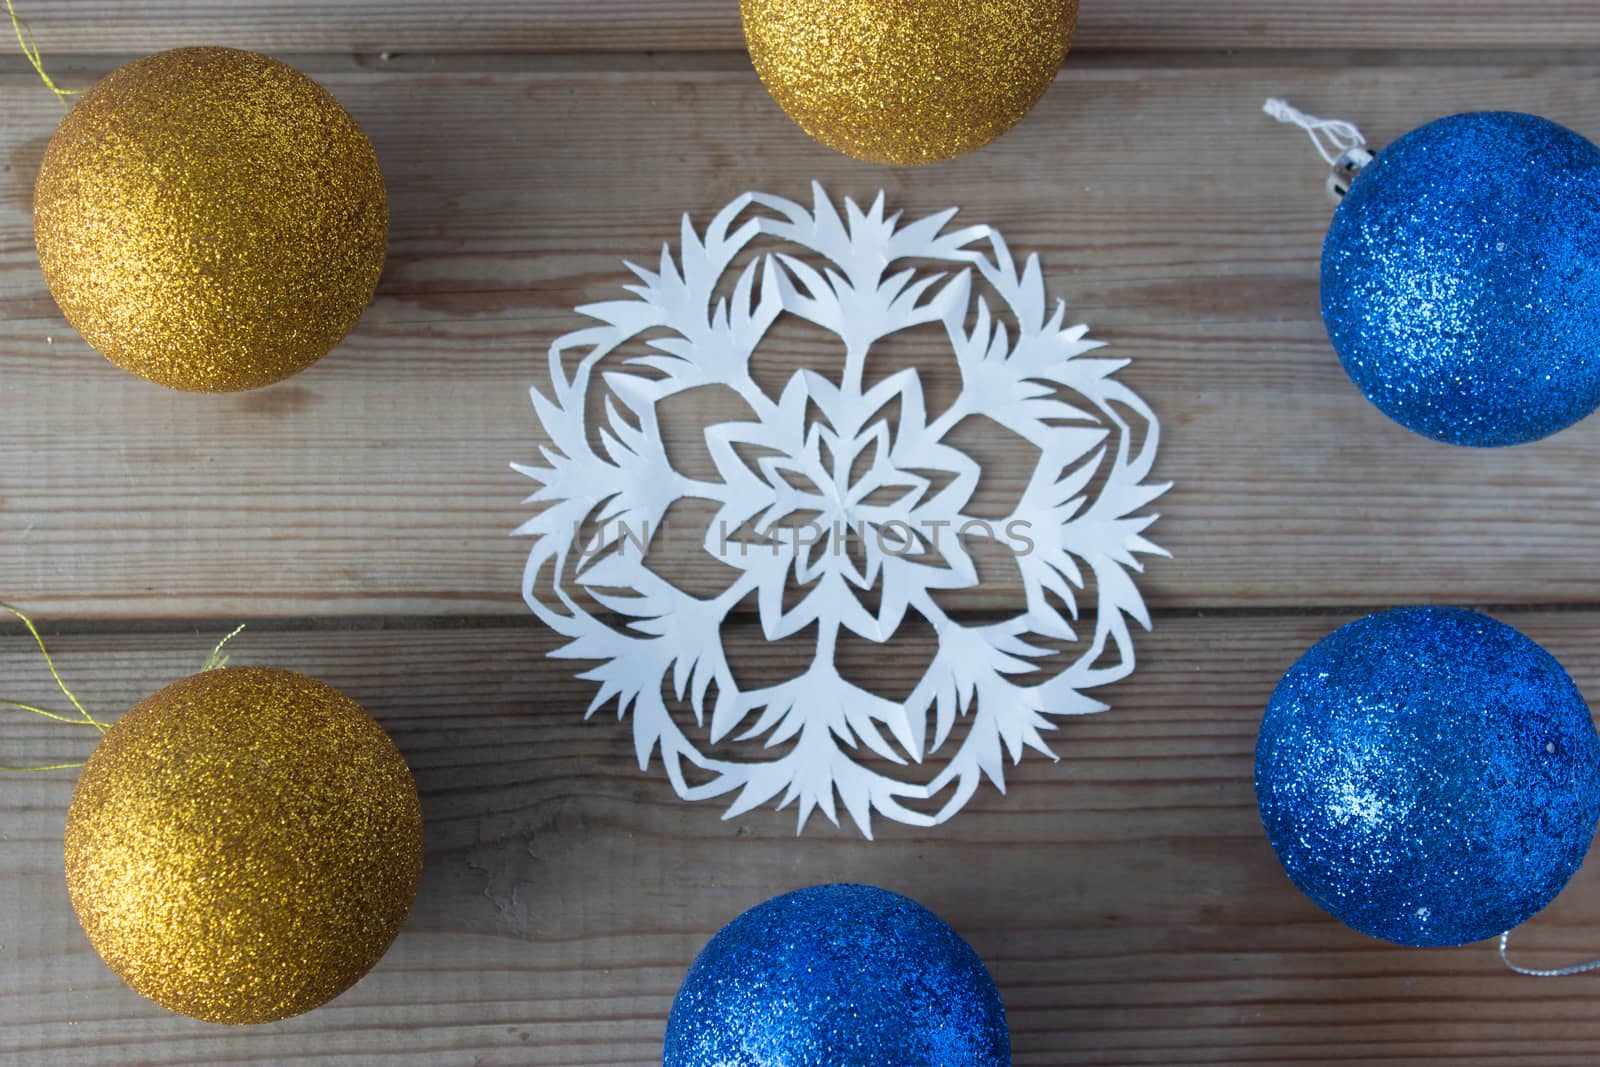 paper snowflake and Christmas balls on the wooden table